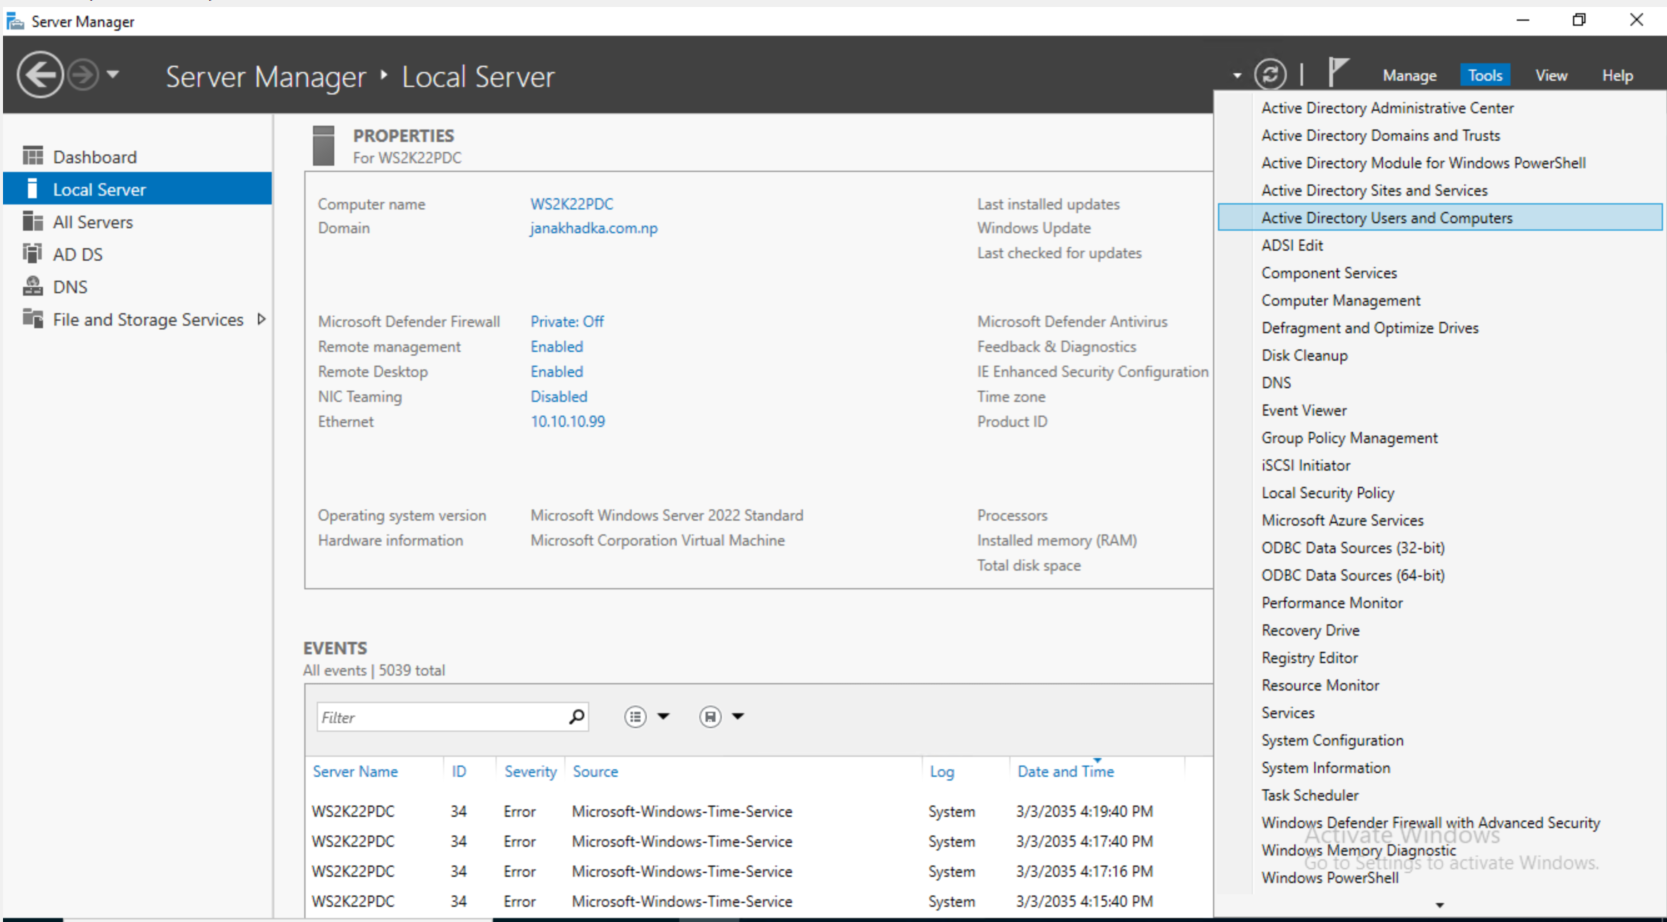 Step By Step Guide: How to Setup Active Directory Domain Service on Windows Server 2022